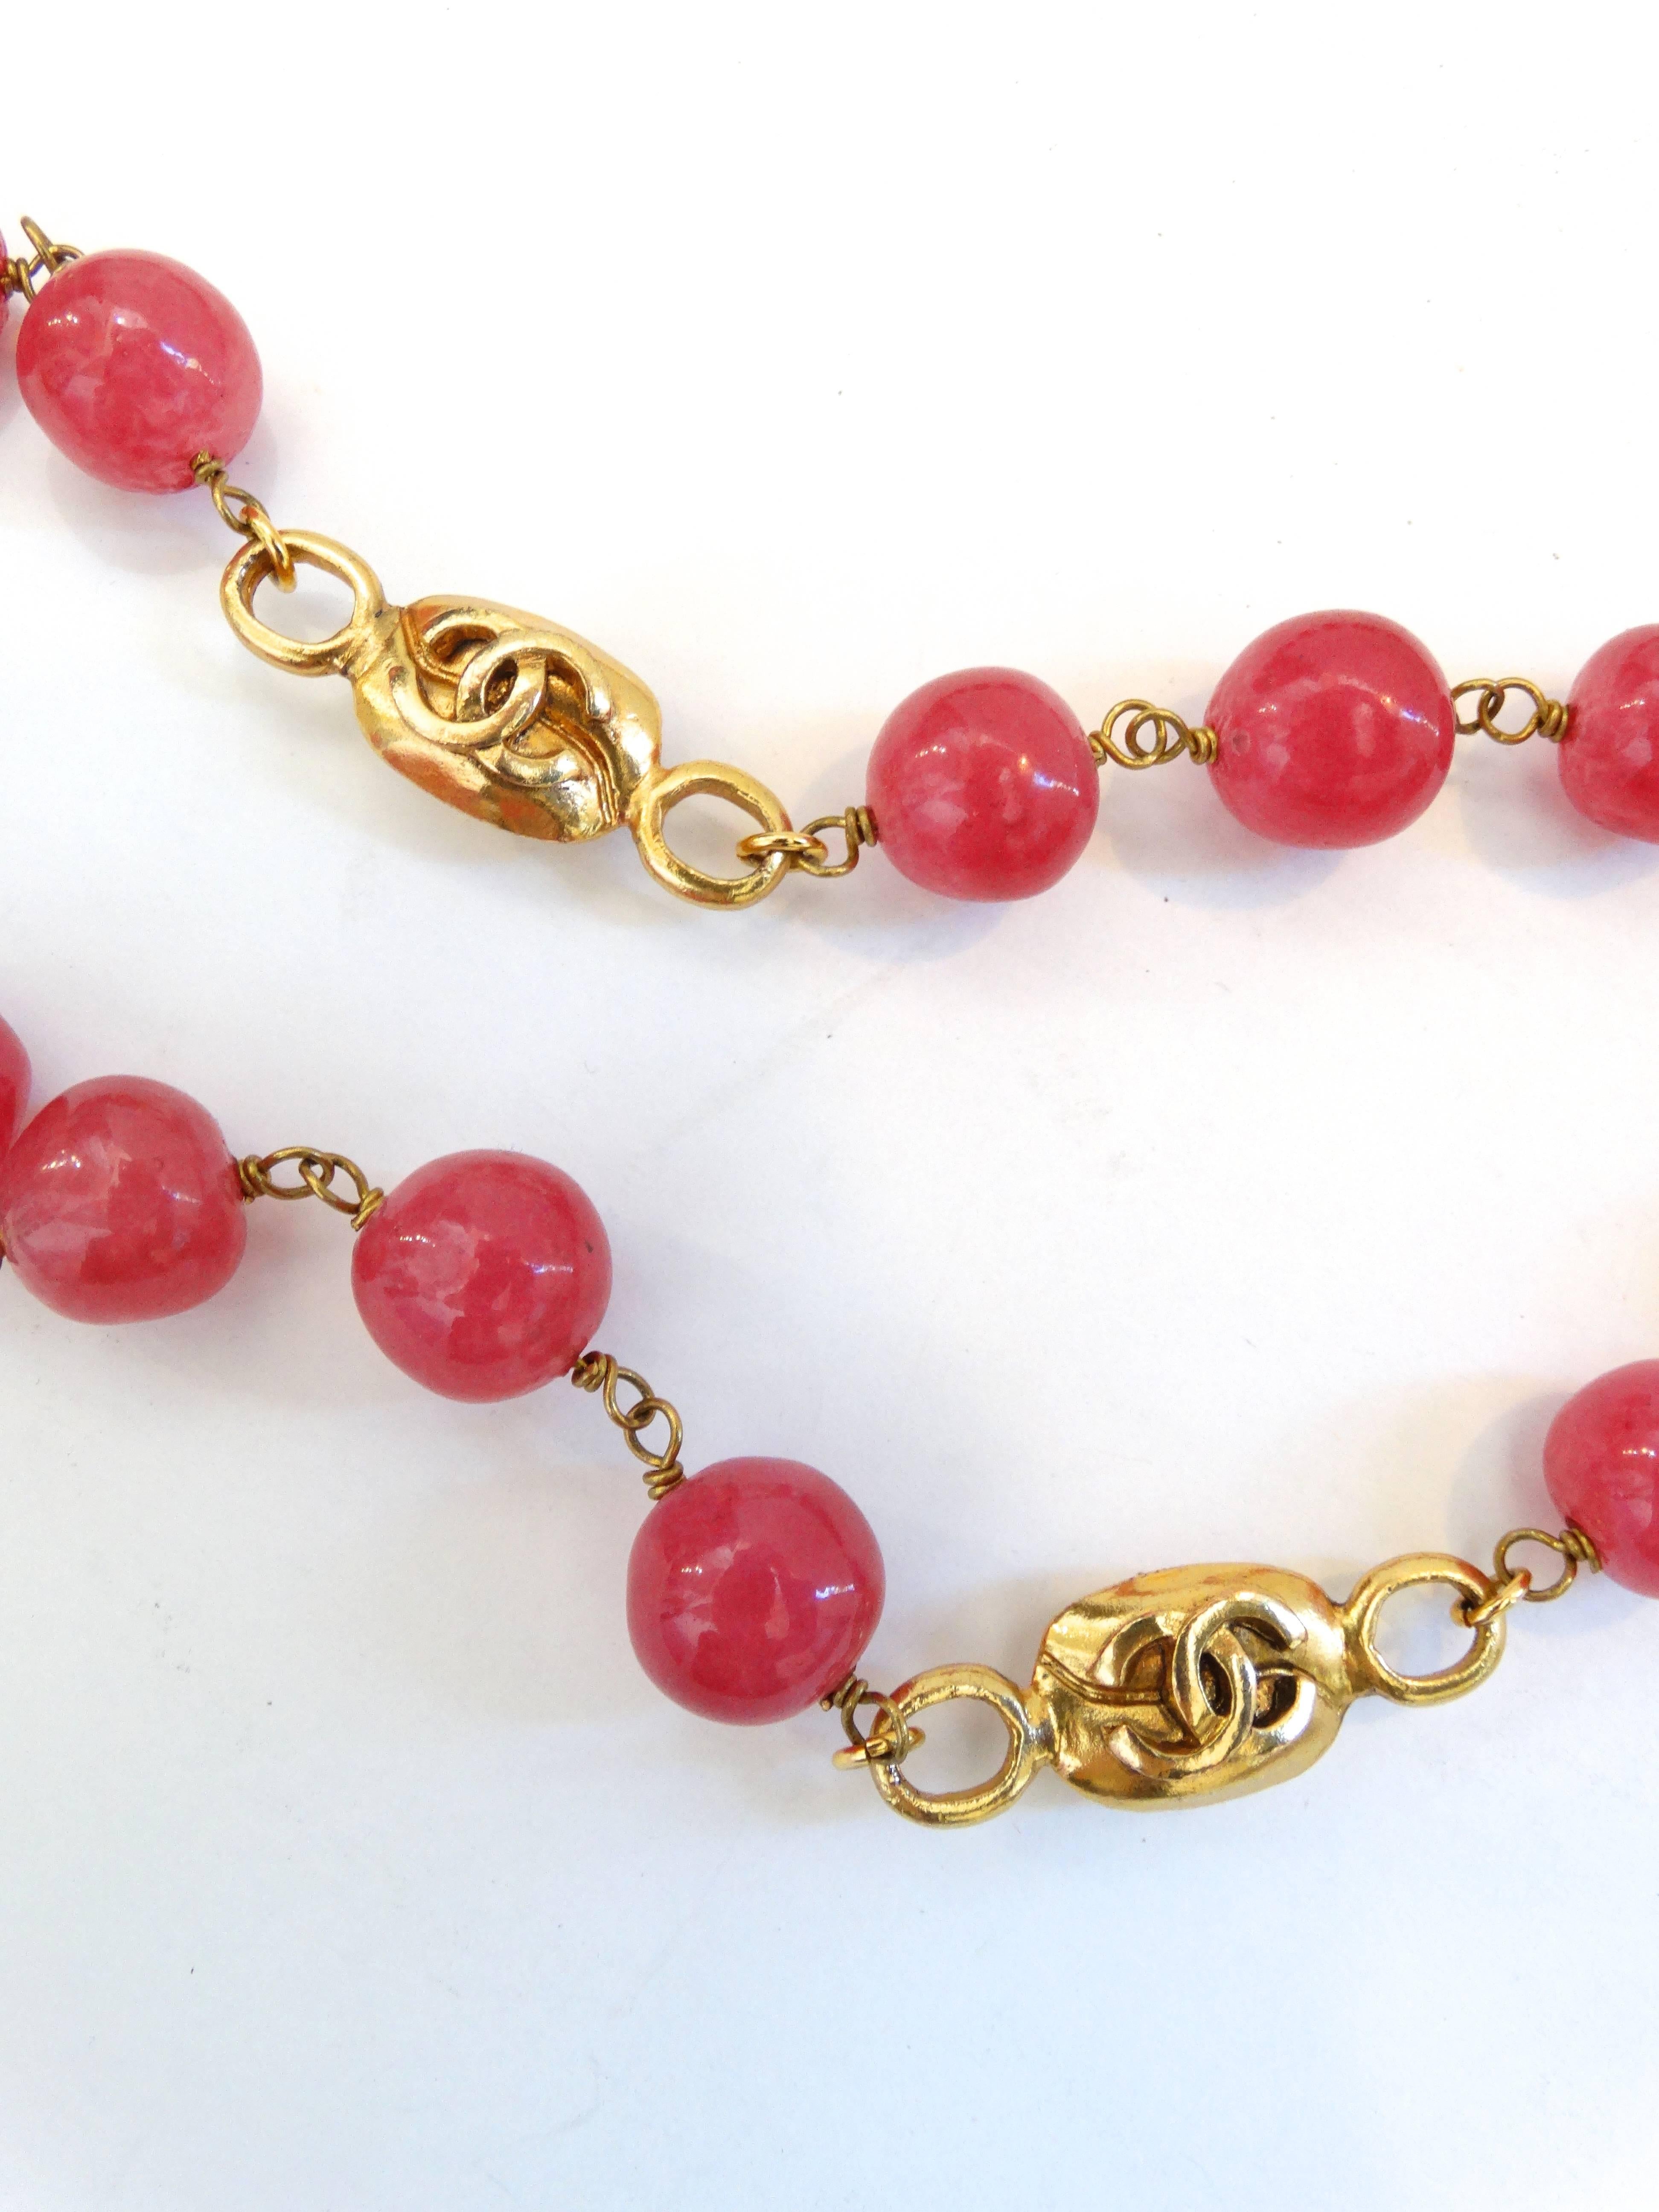 The most elegant strand necklace from Chanel circa 1997! Made of glossy pink Gripoix glass beads with gold chain hardware and CC monogram charms throughout the entire necklace. Looks great worn as a single strand or doubled up around the neck. Hook